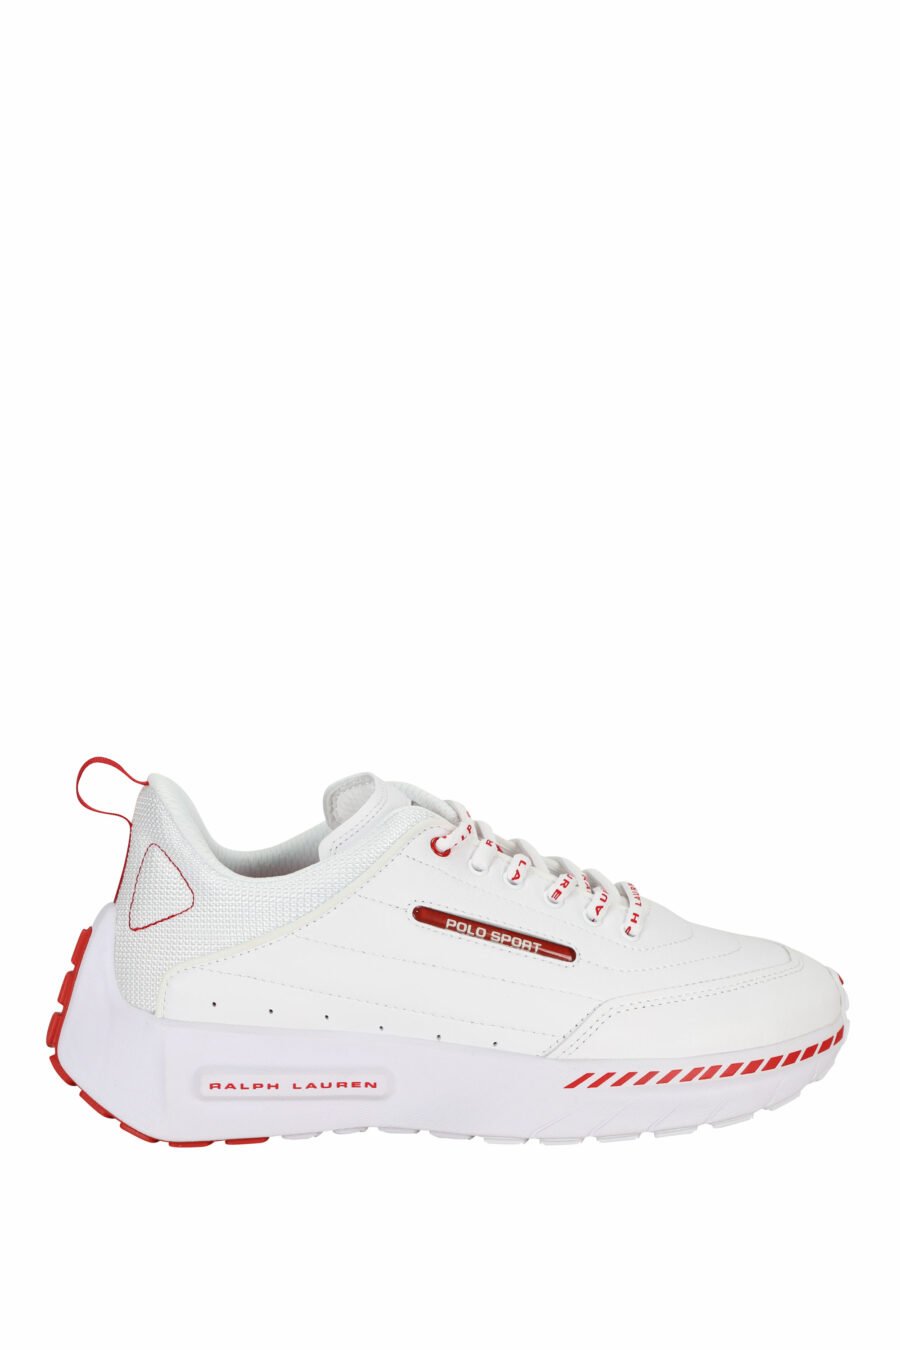 White trainers with mini-logo and red details - 3616535649279